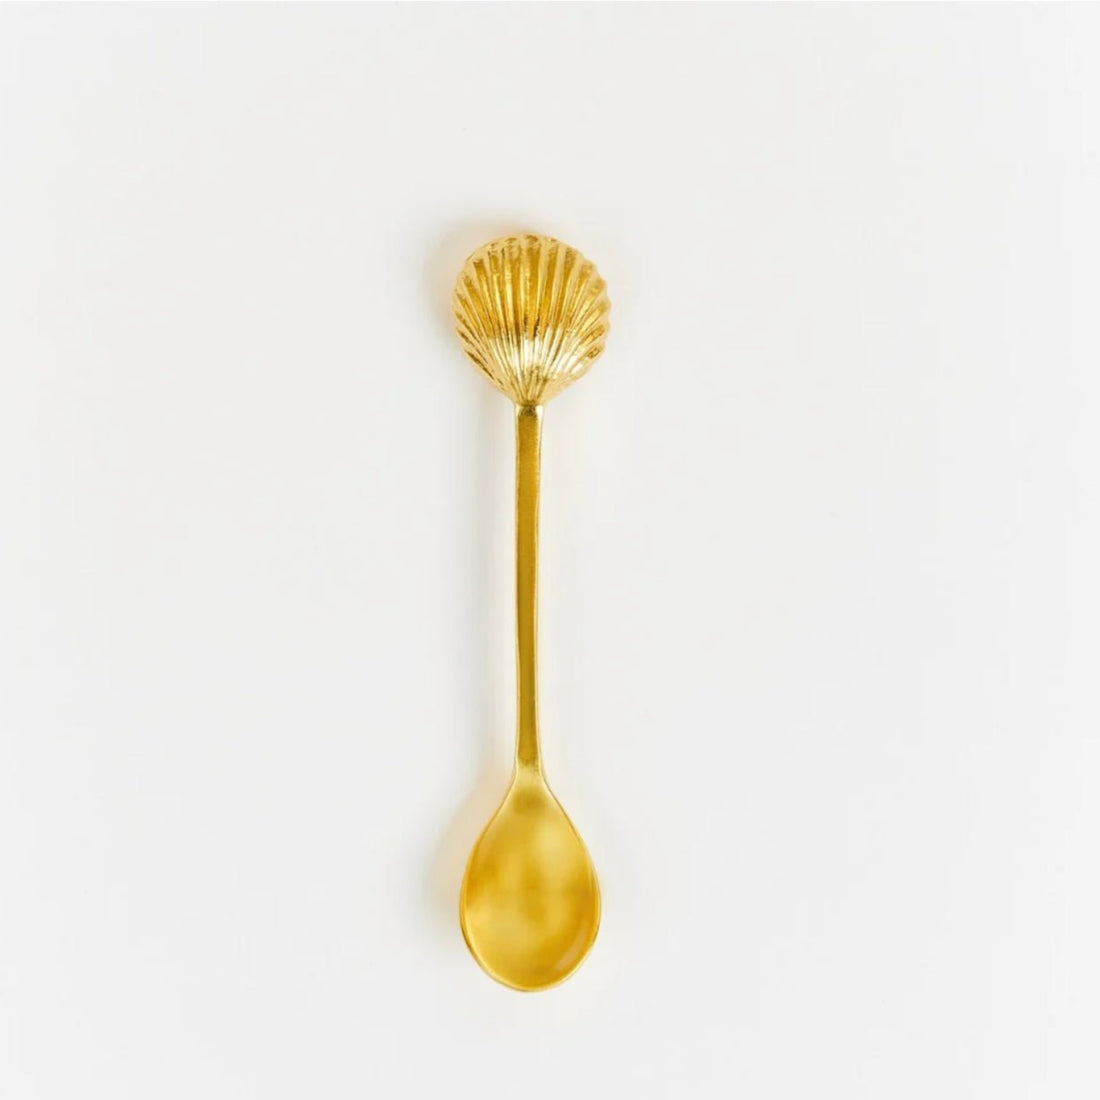 Bonnie and Neil - Shell Teaspoon - The Flower Crate